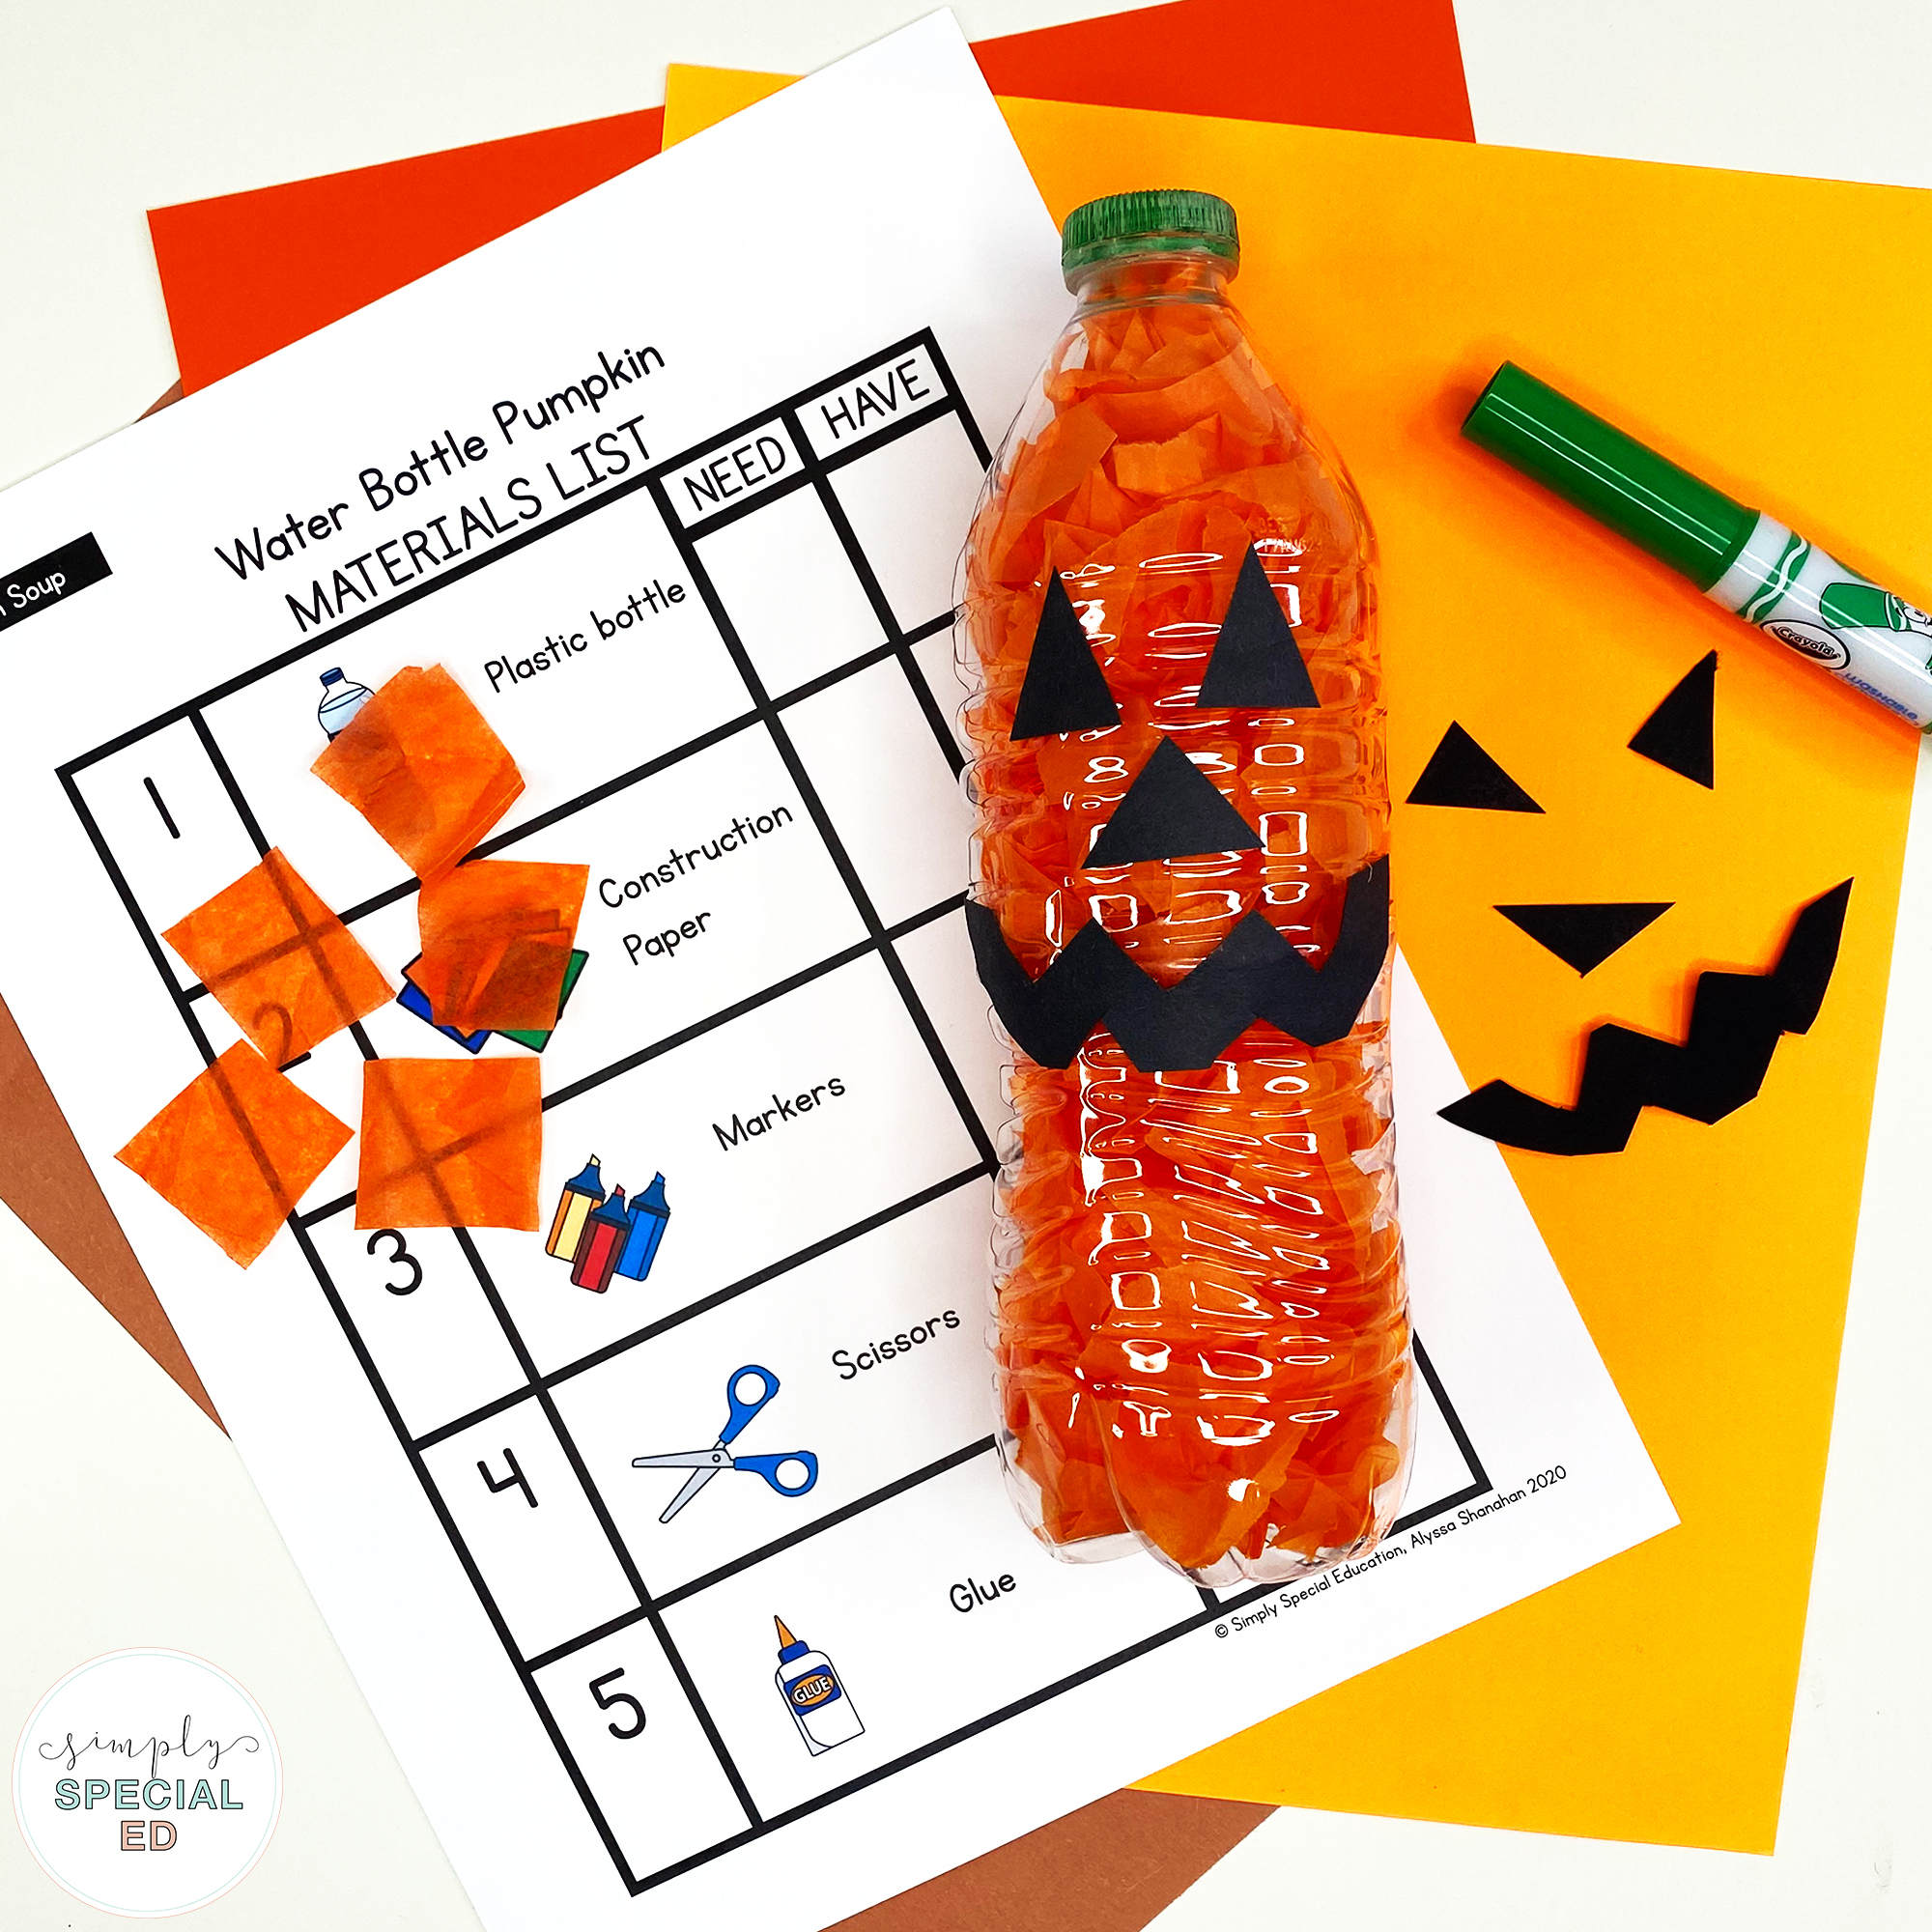 Let’s take a look at some adapted activities included in the Pumpkin Soup Book Companion for your special education classroom.